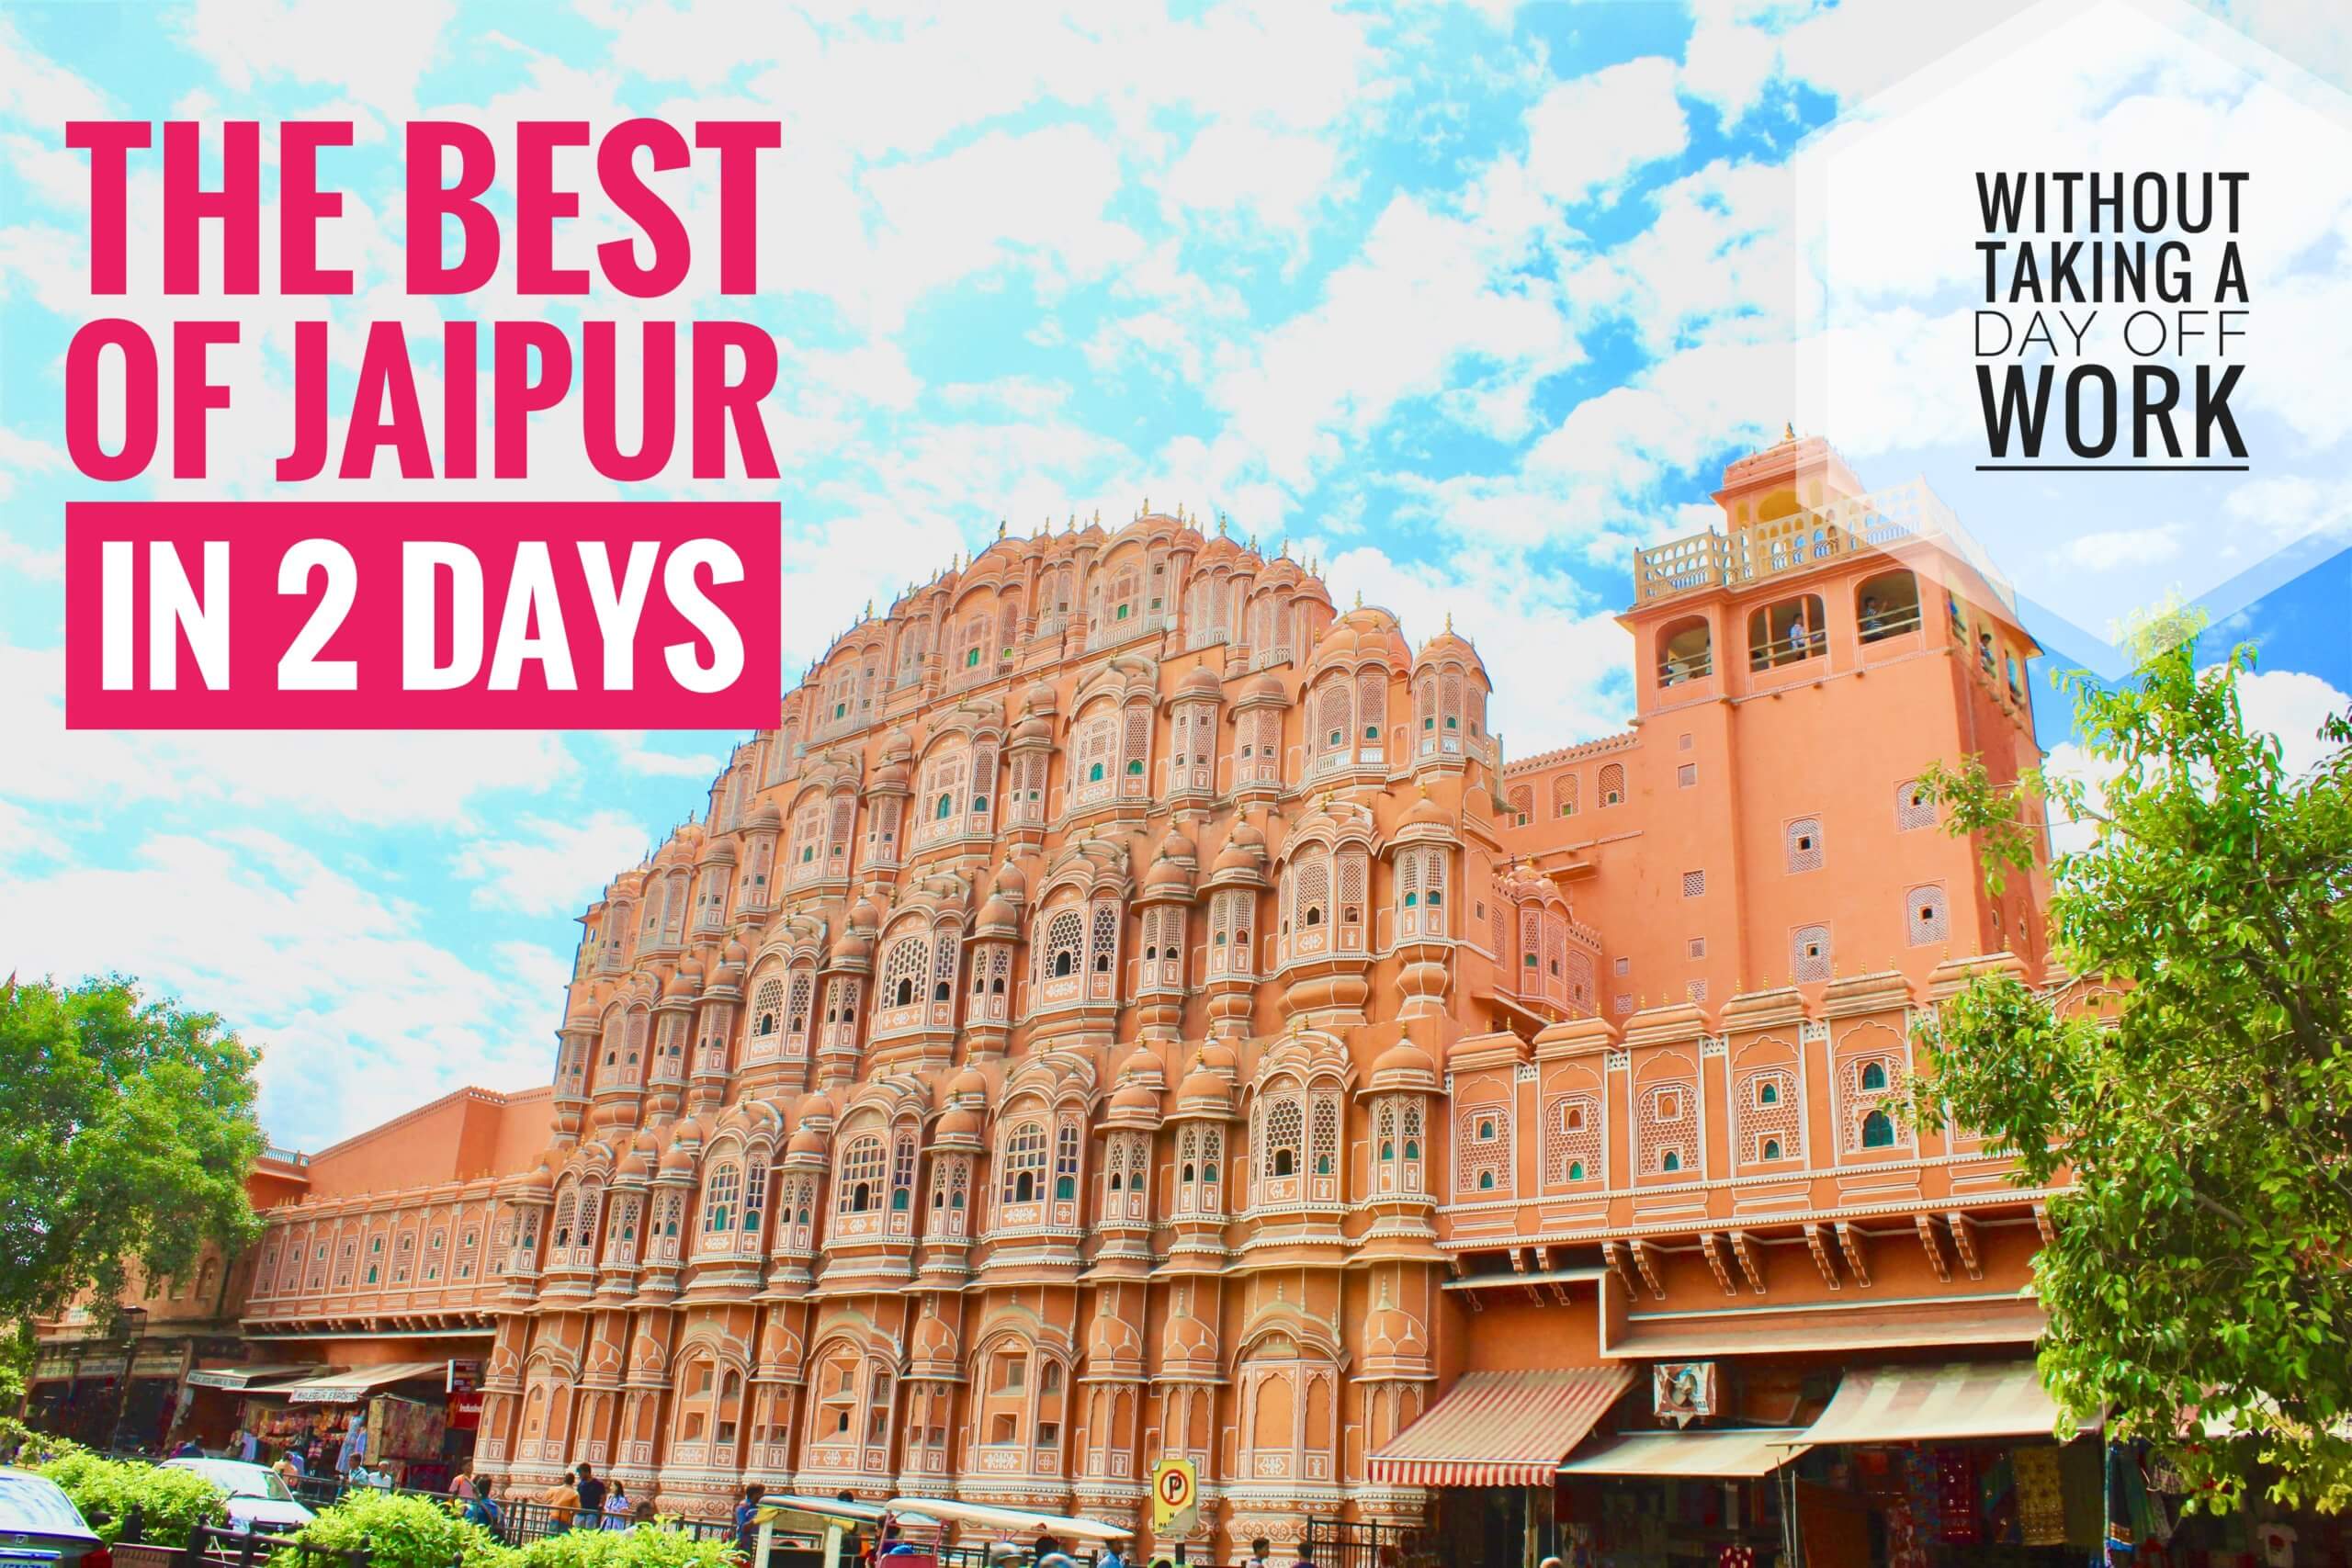 The Best of Jaipur in 2 Days